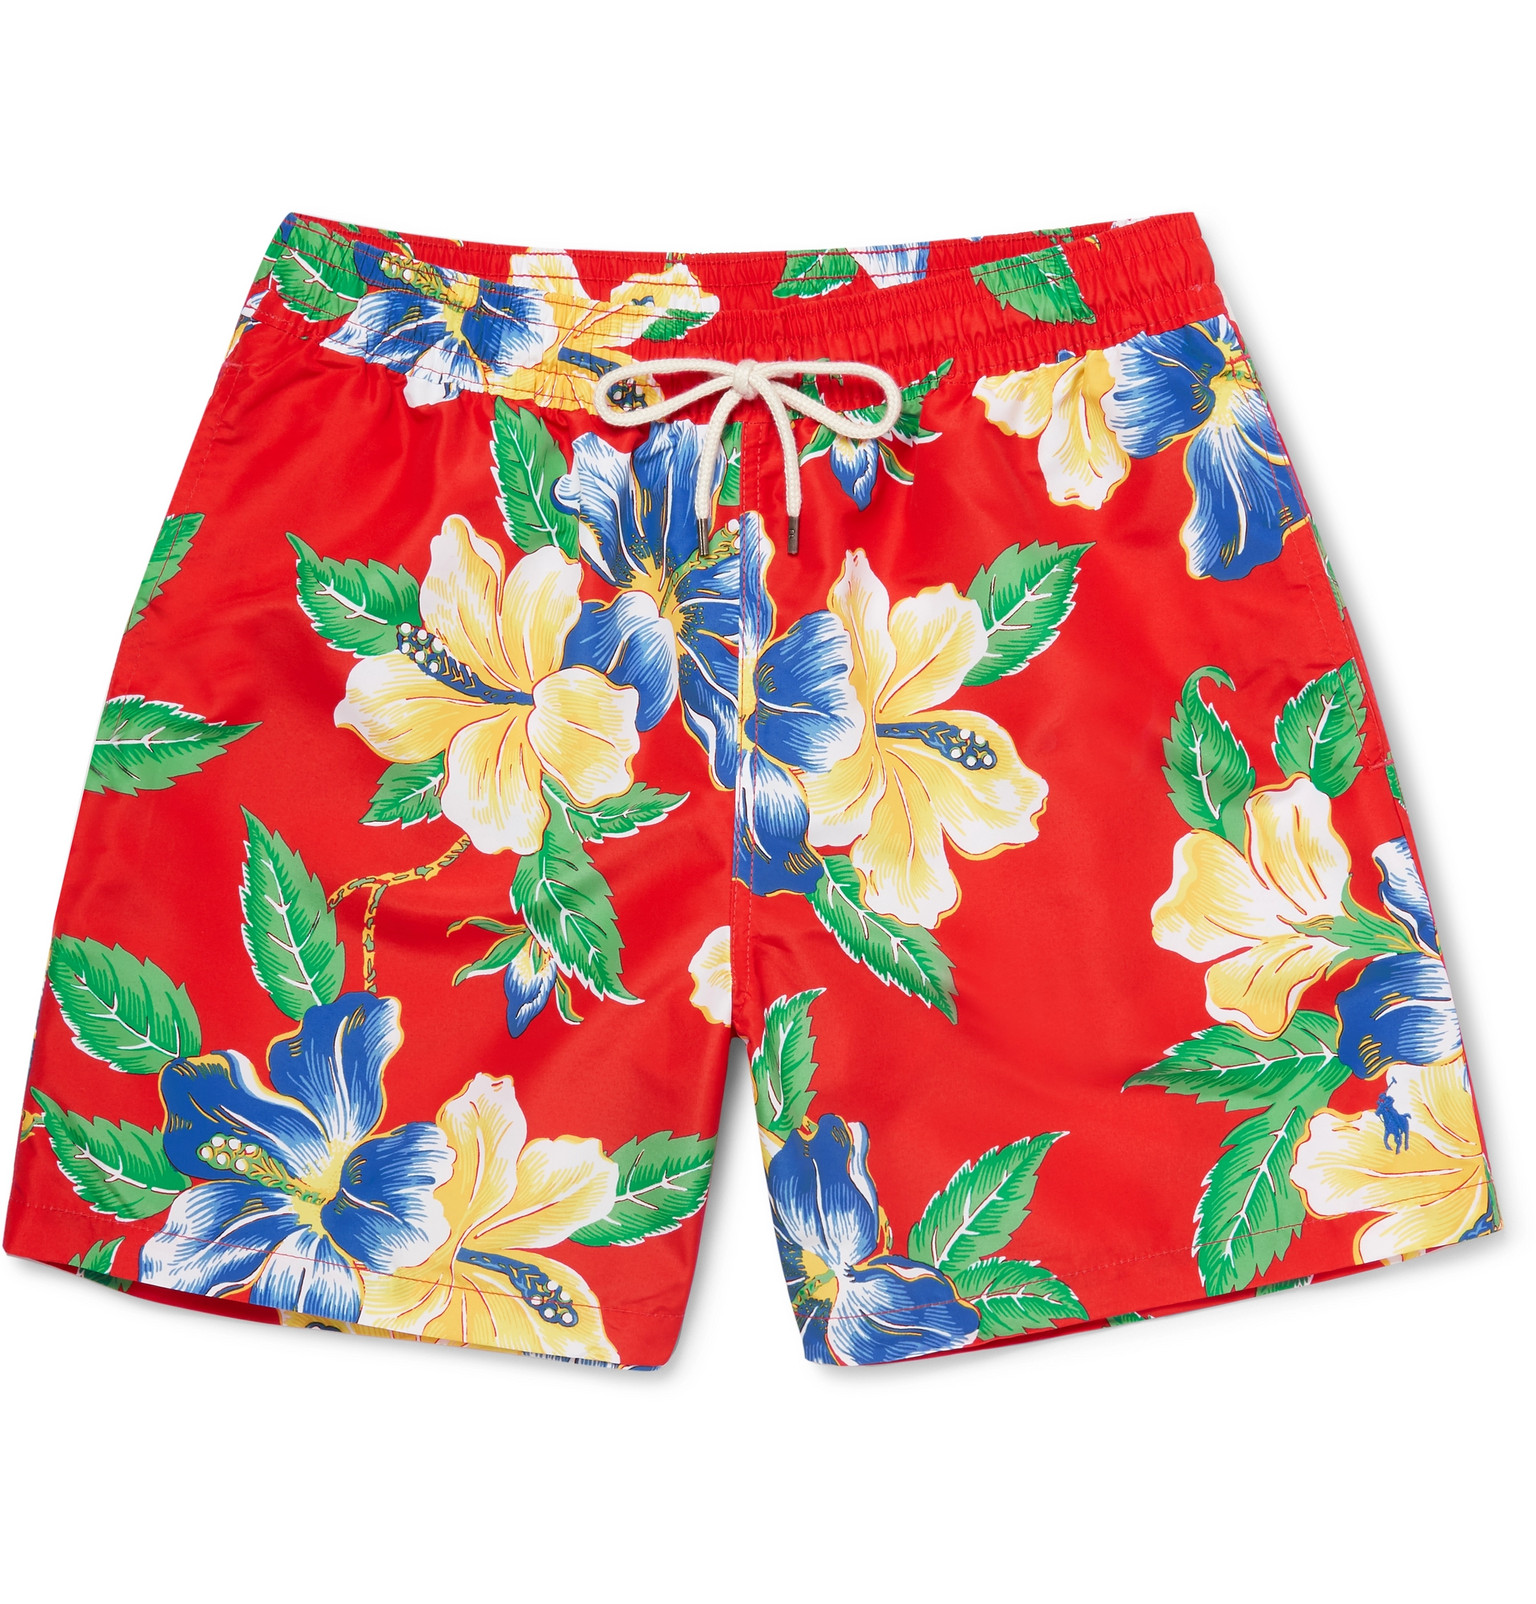 polo shorts red